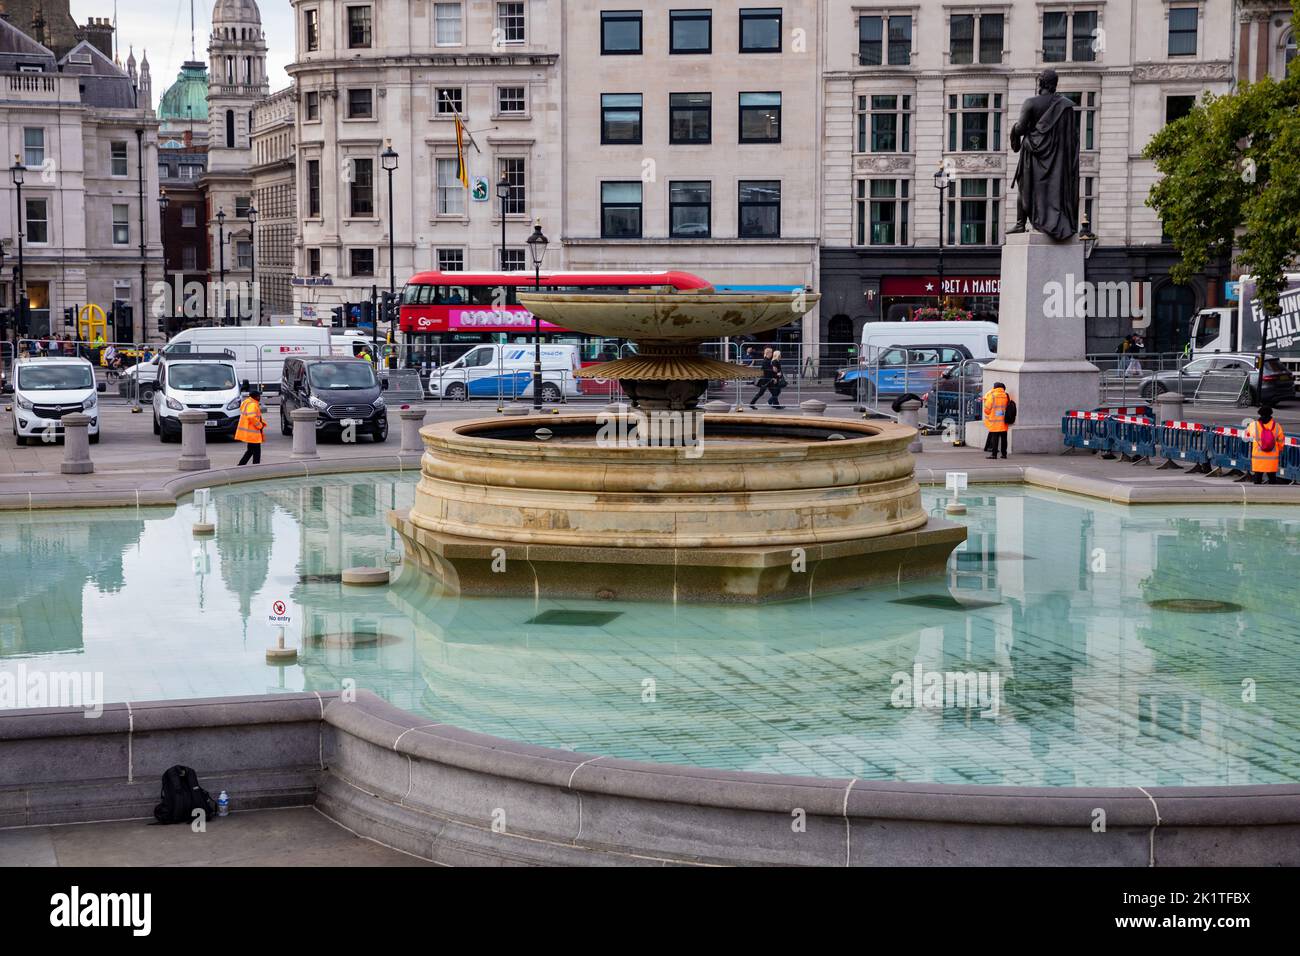 Early Morning in Trafalgar Square, London seems very quiet with no visitors Stock Photo